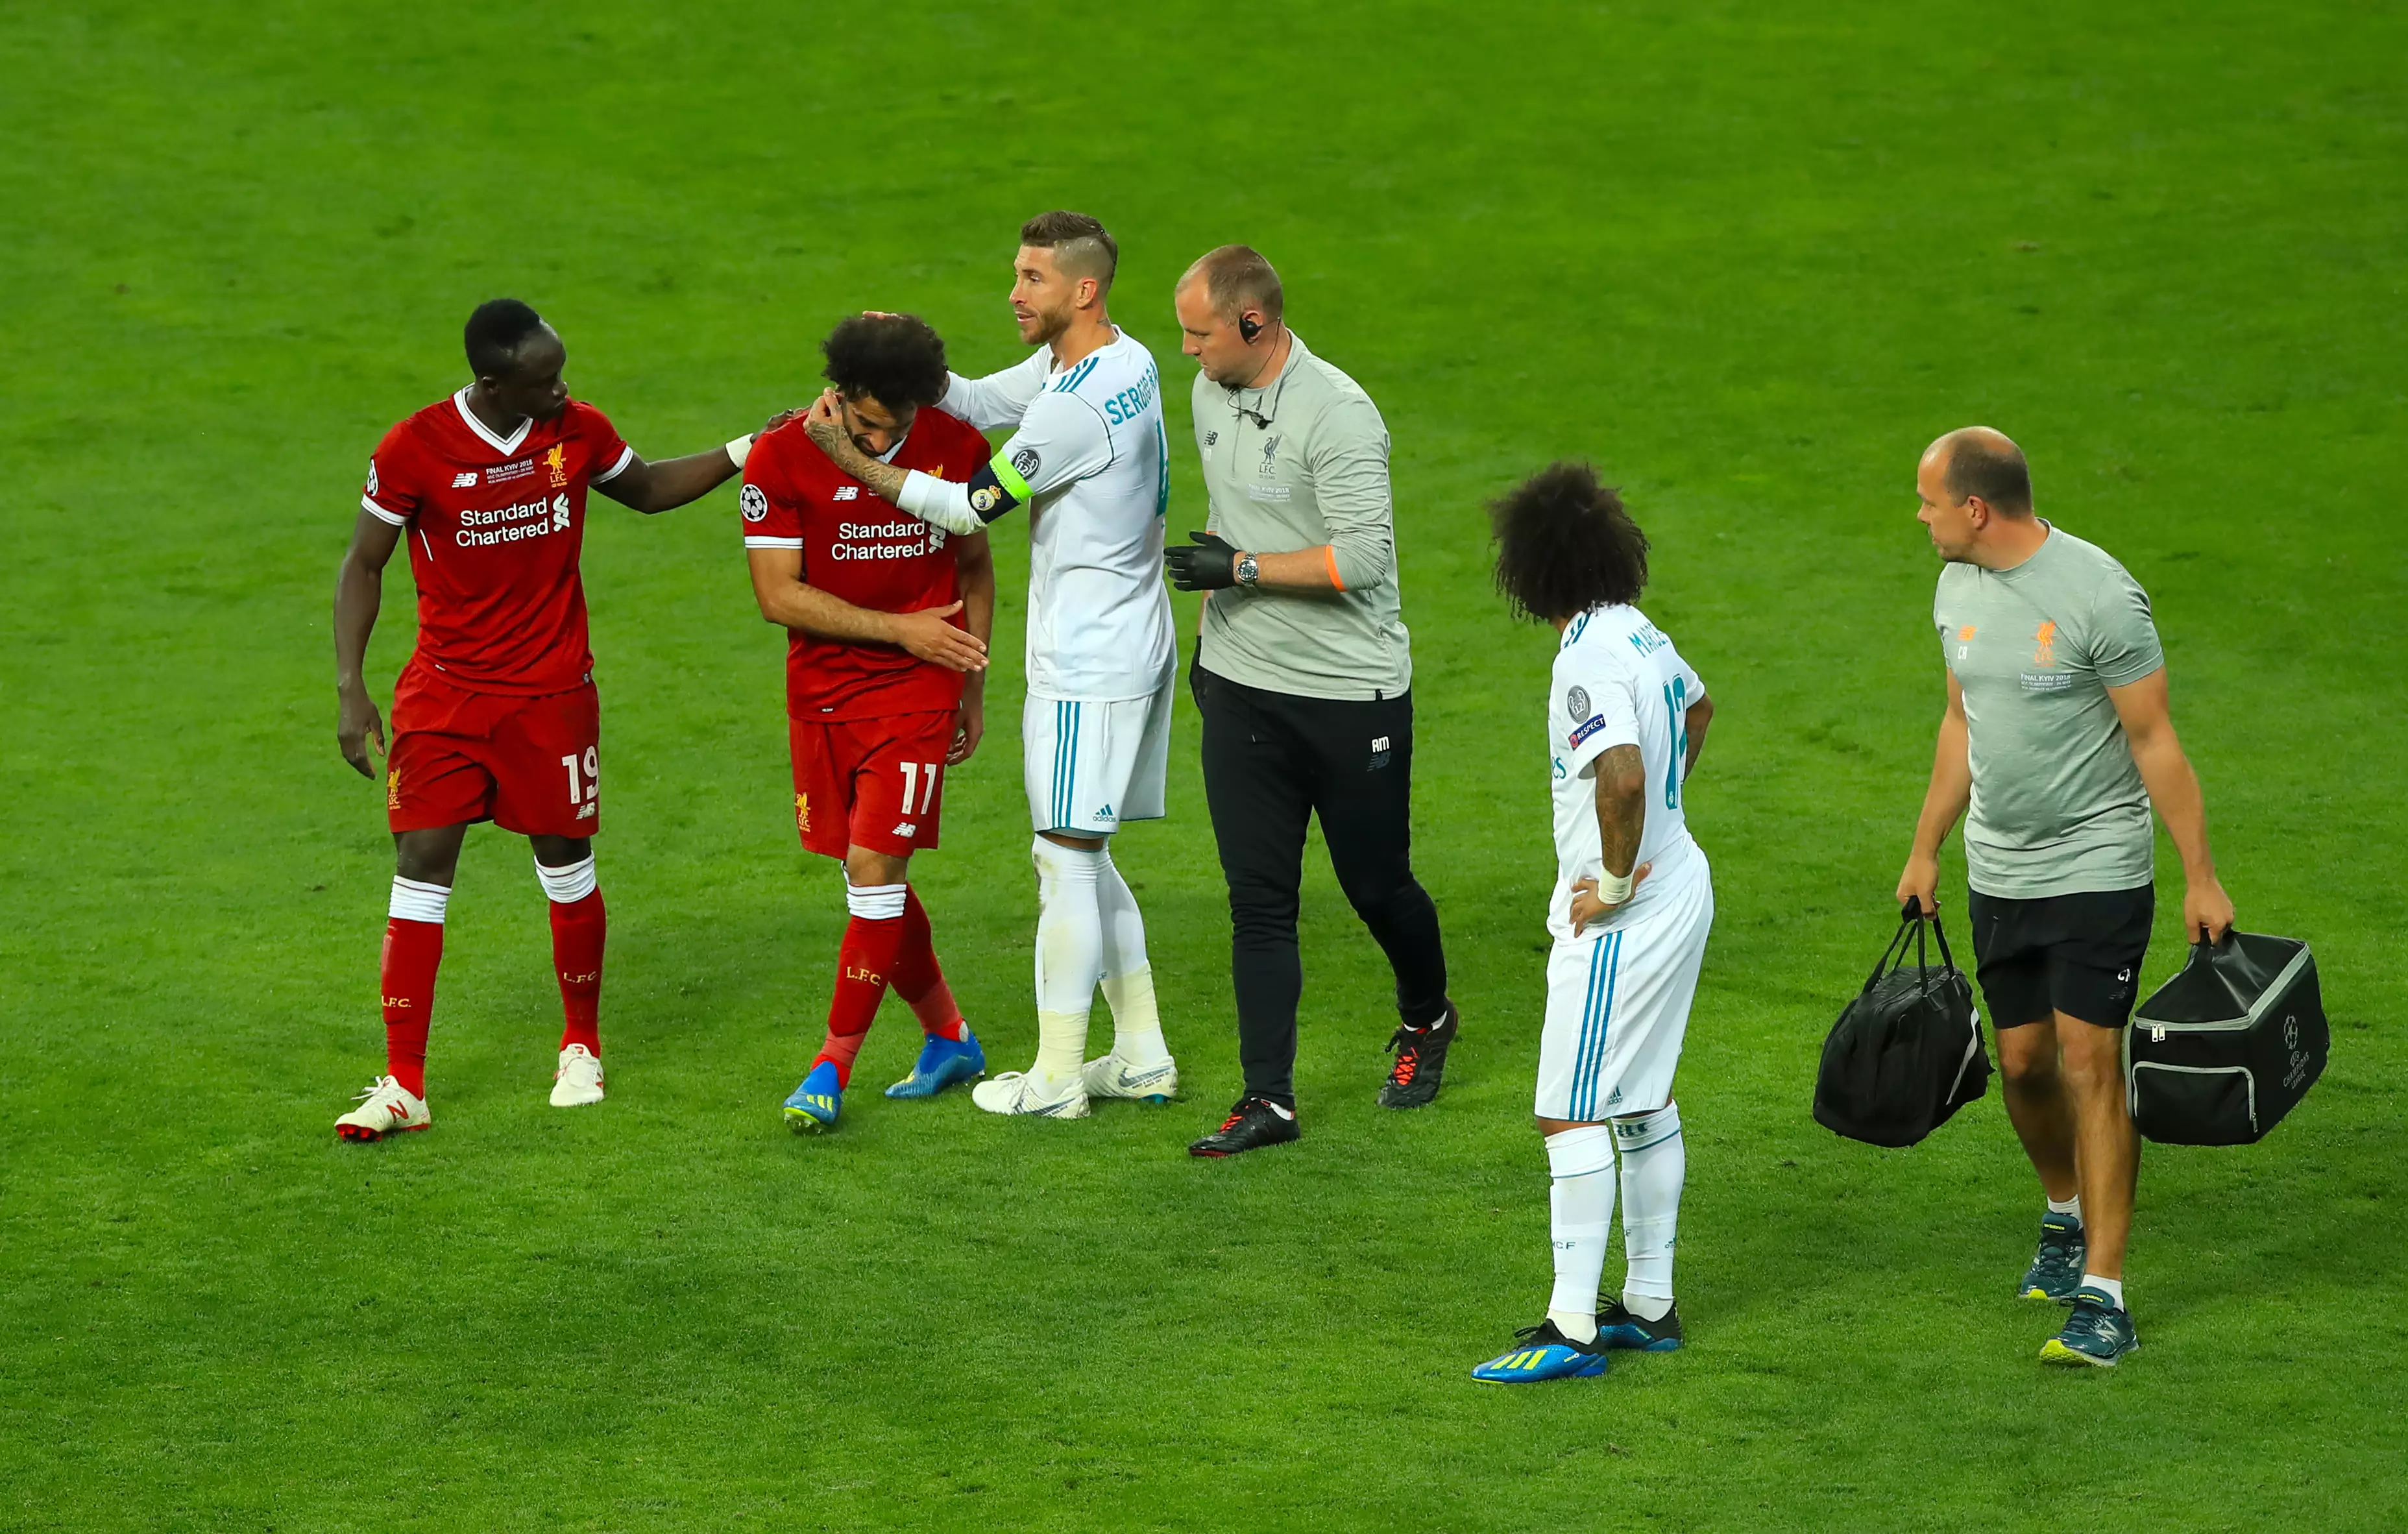 Ramo tries to embrace Salah as the Liverpool forward gets subbed off. Image: PA Images